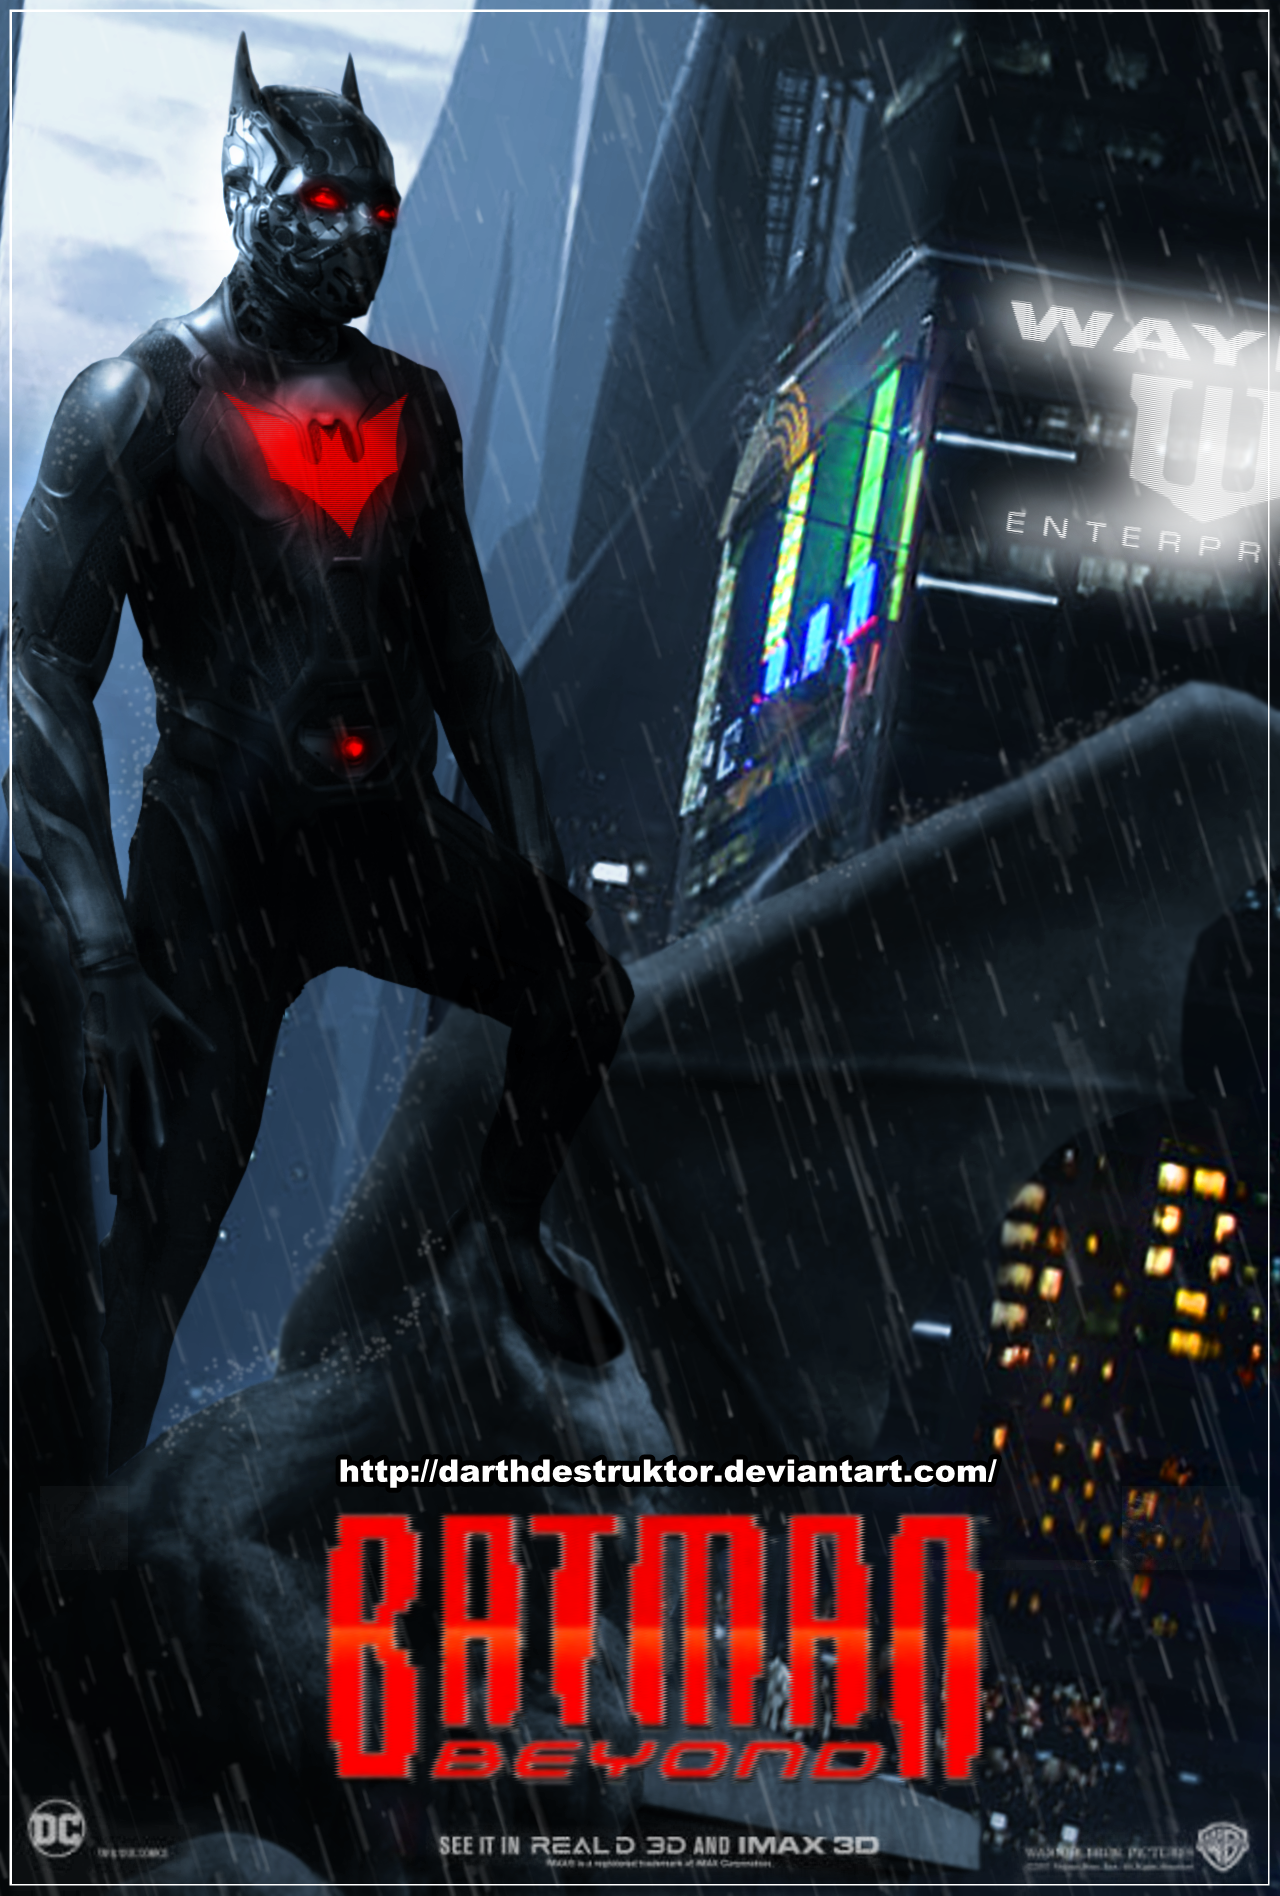 28 Top Pictures Batman Beyond Movie 2020 / Live Action BATMAN BEYOND Movie In The Works? — GeekTyrant